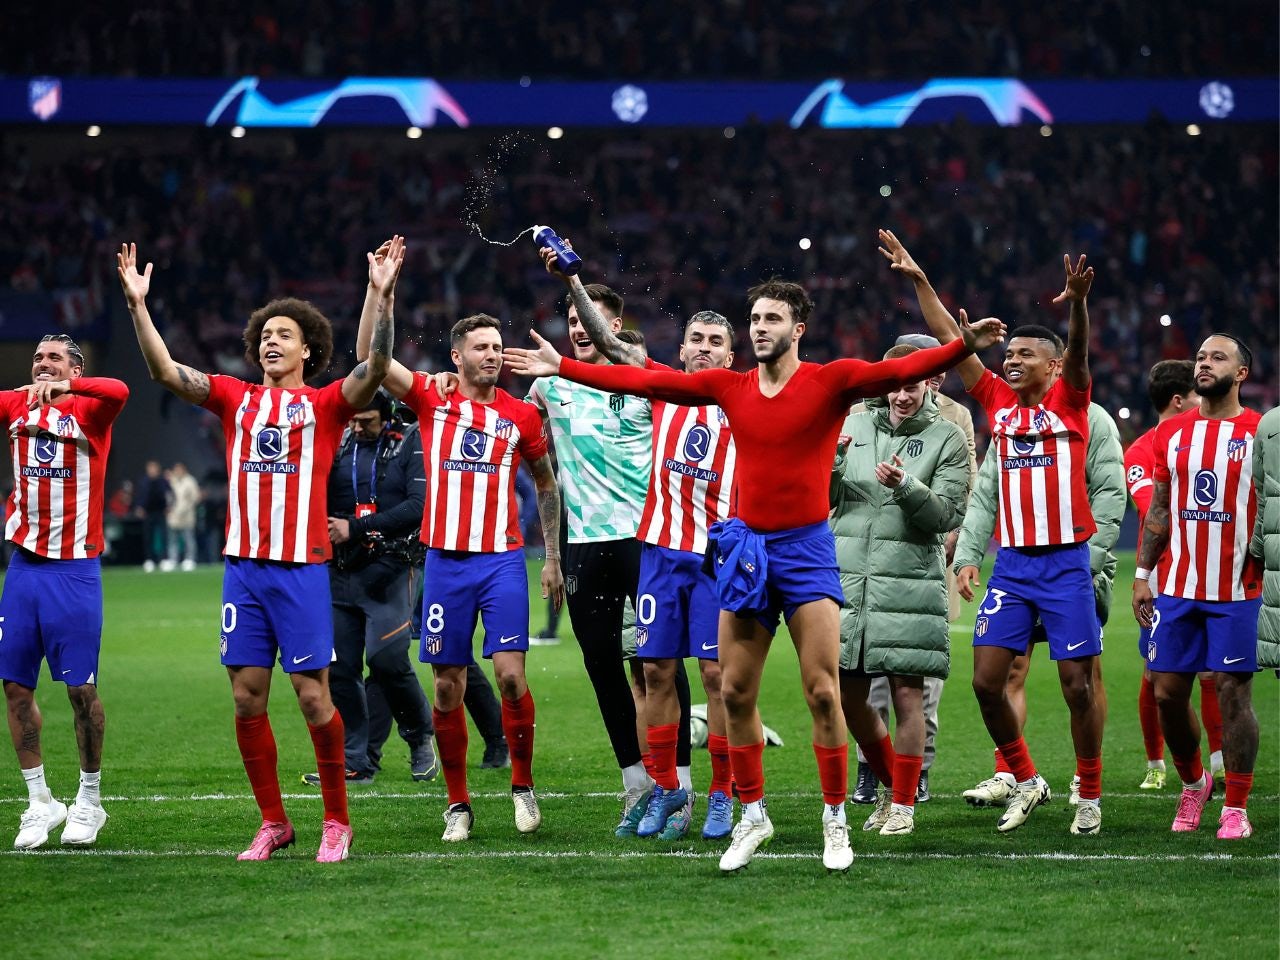 Atletico Madrid beat Inter Milan on penalties to seal Champions League quarter-final spot